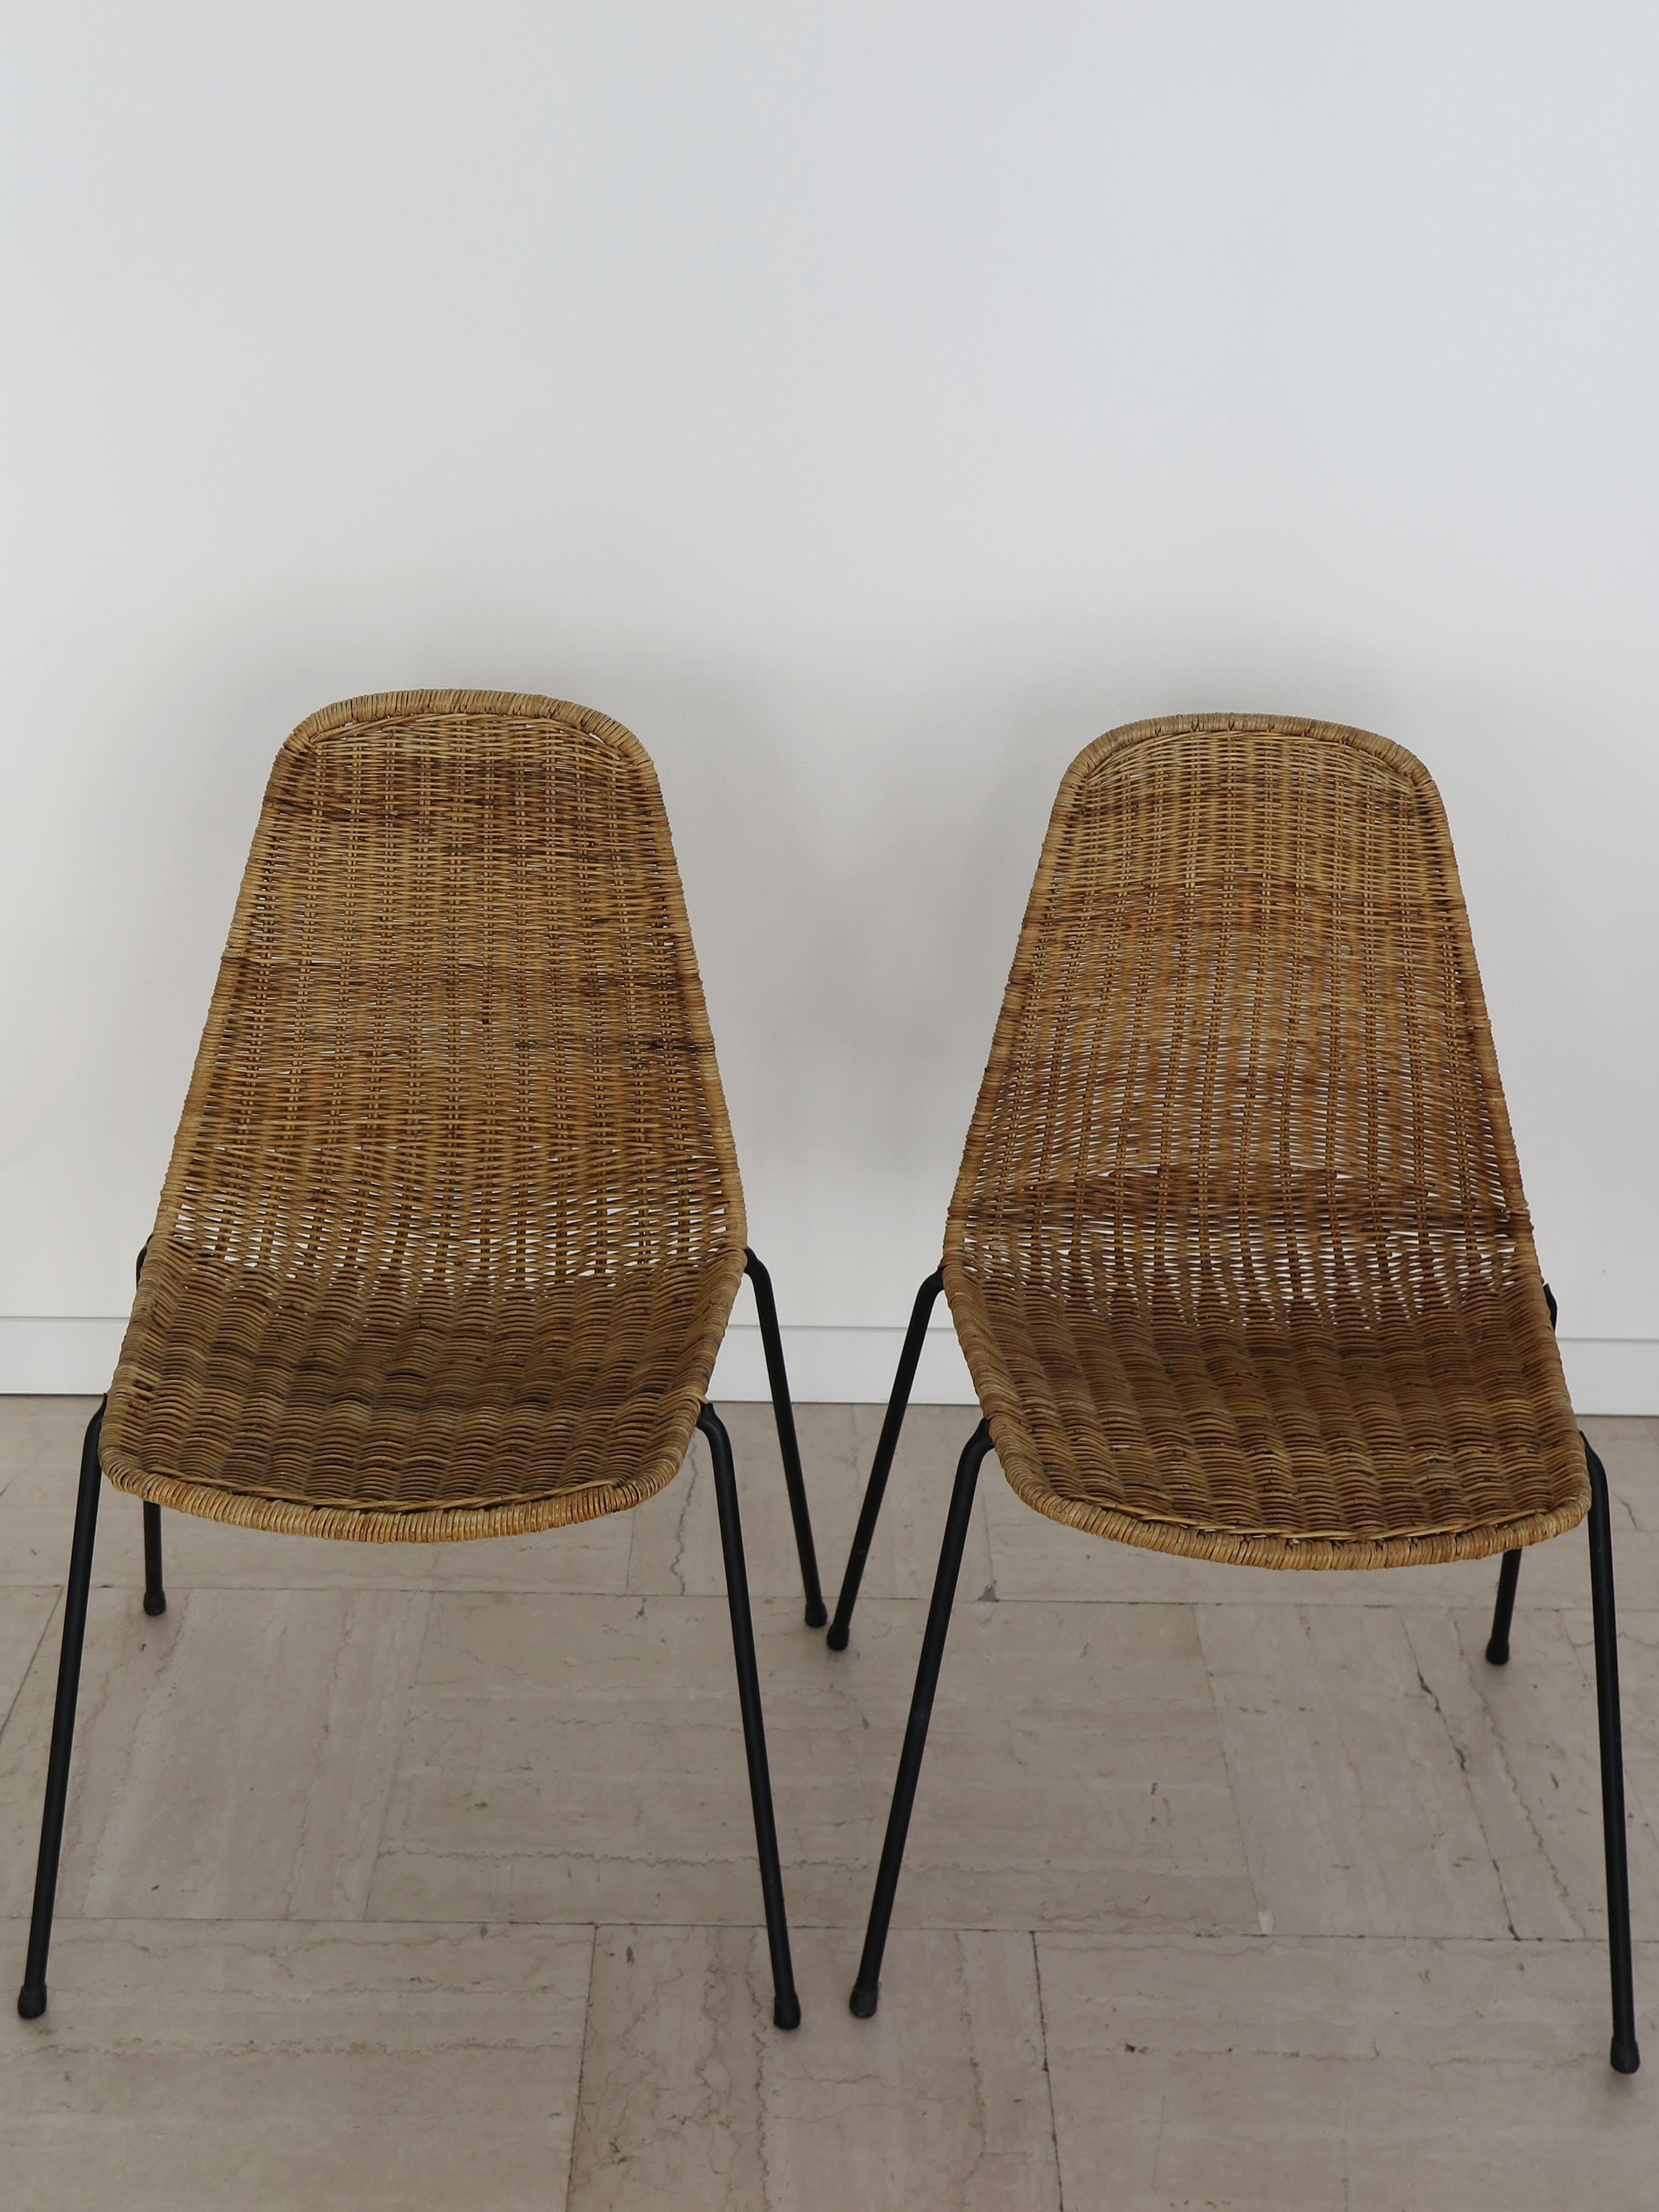 European Italian Midcentury Rattan Dining Chairs Design Campo & Graffi for Home, 1950s For Sale